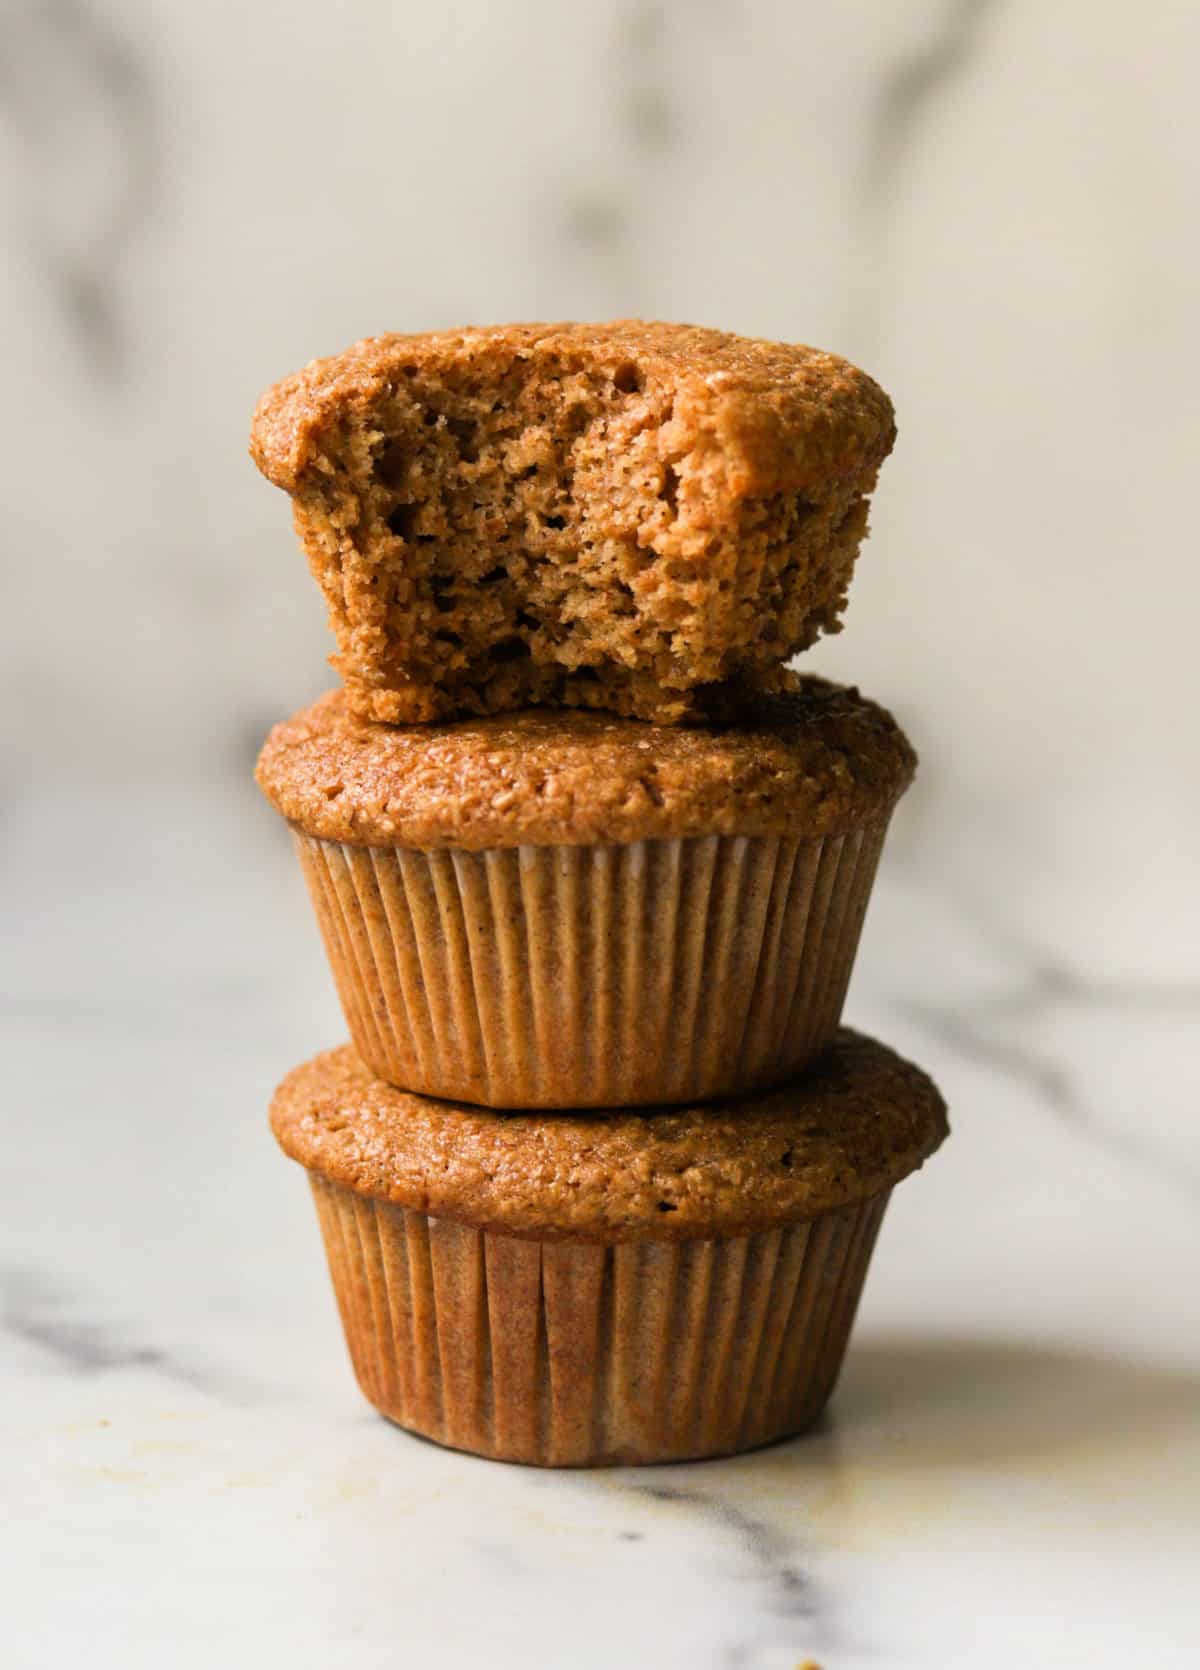 A front shot of bran muffins stacked on top of each other, the top one with a bite taken out of it.